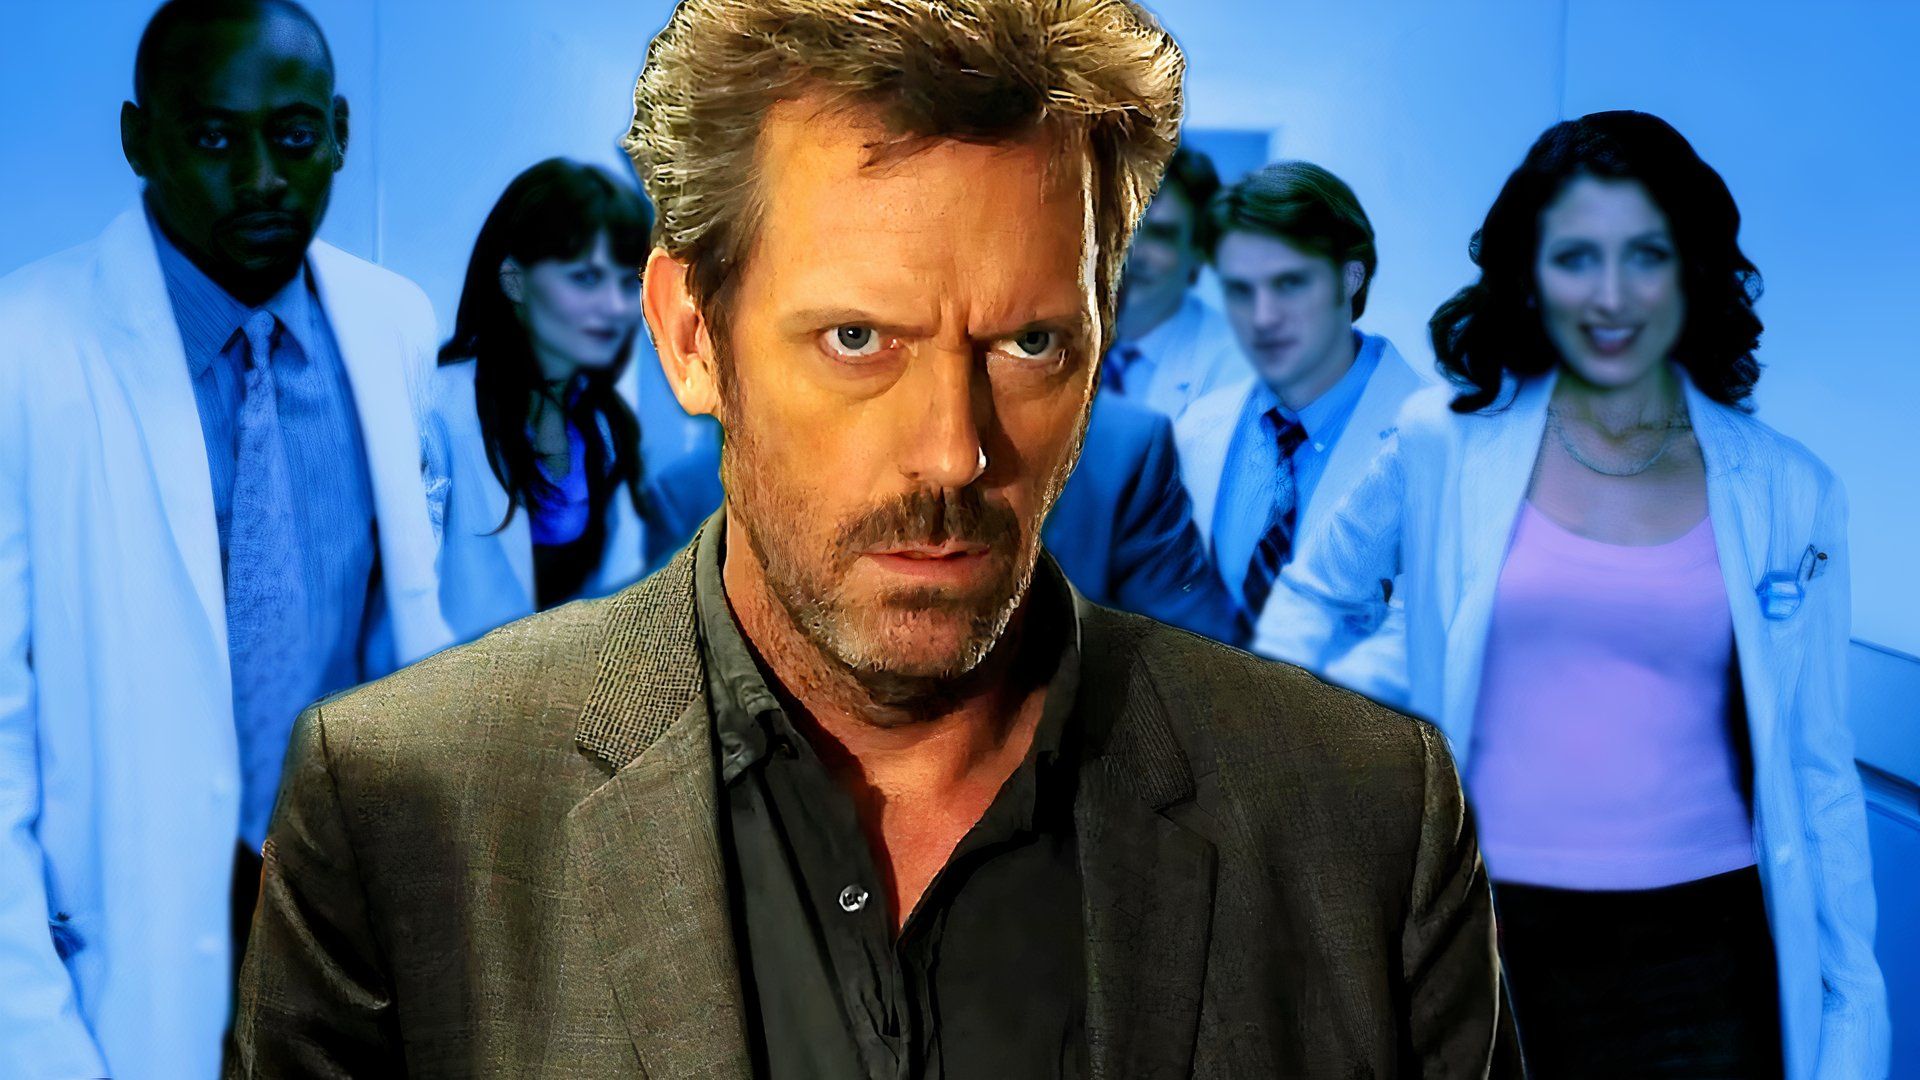 Gregory House looking angry with image of the House team behind